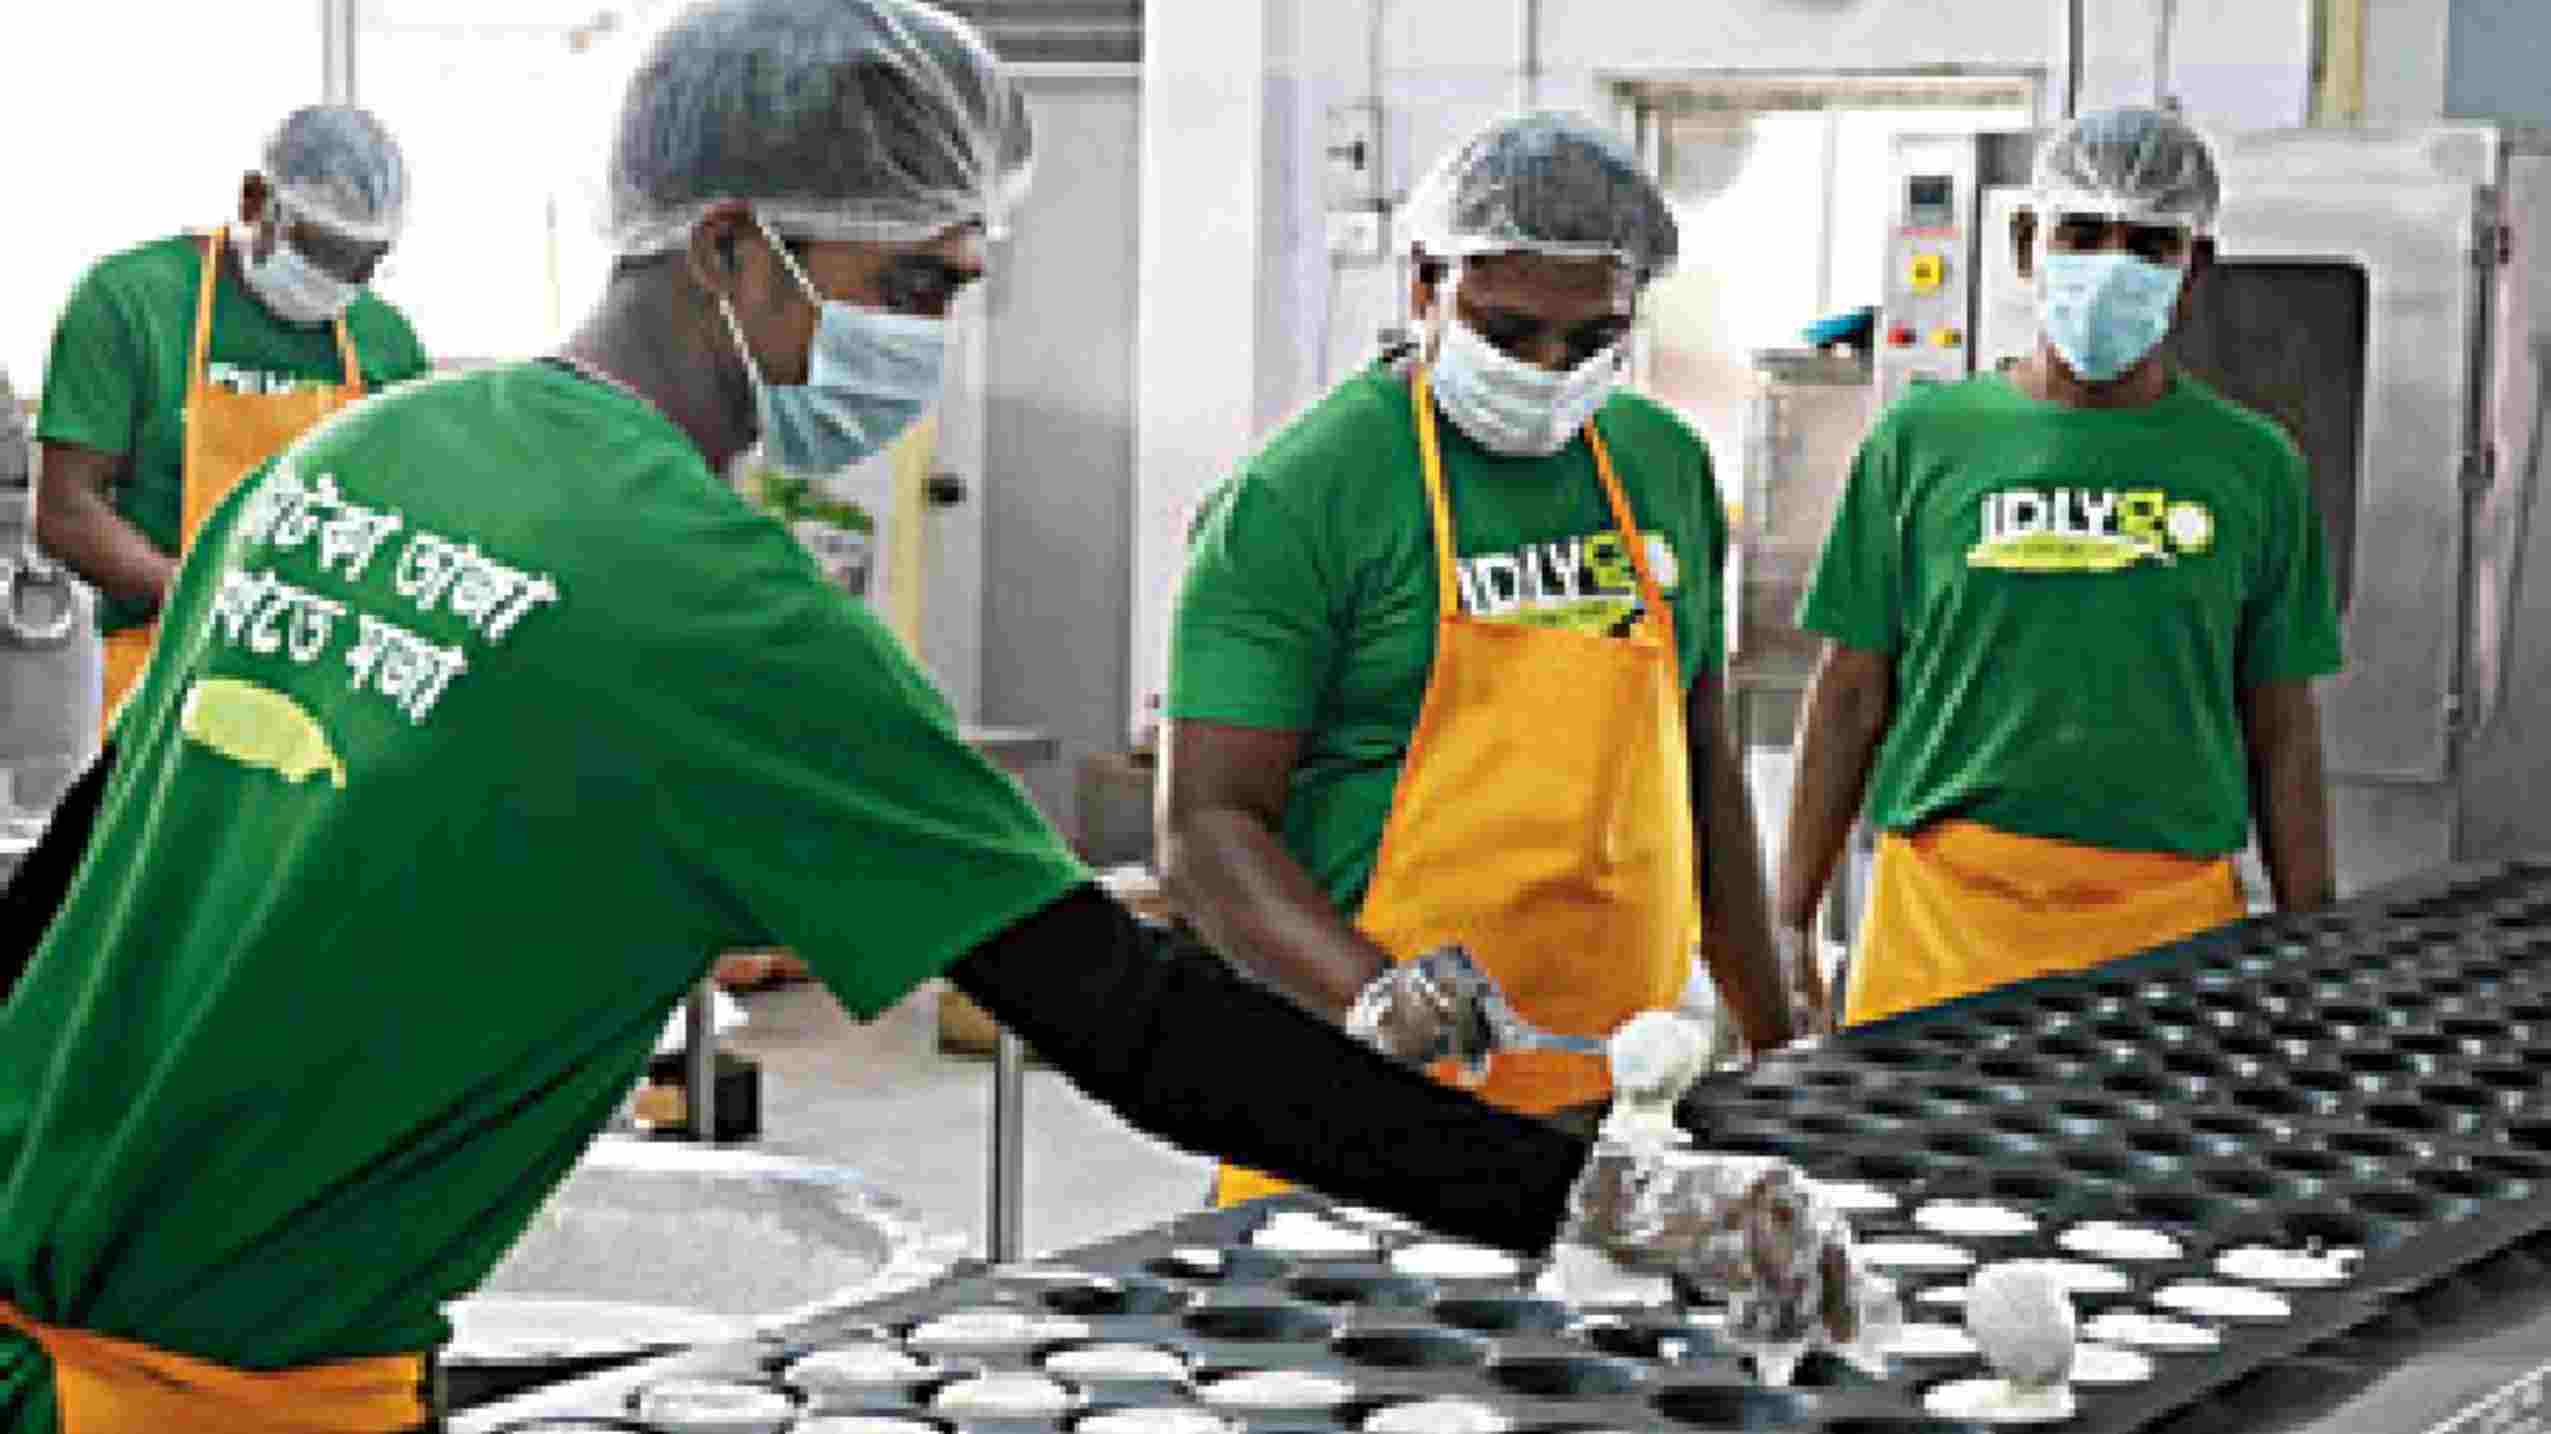 The idli batter is then poured manually in the trays